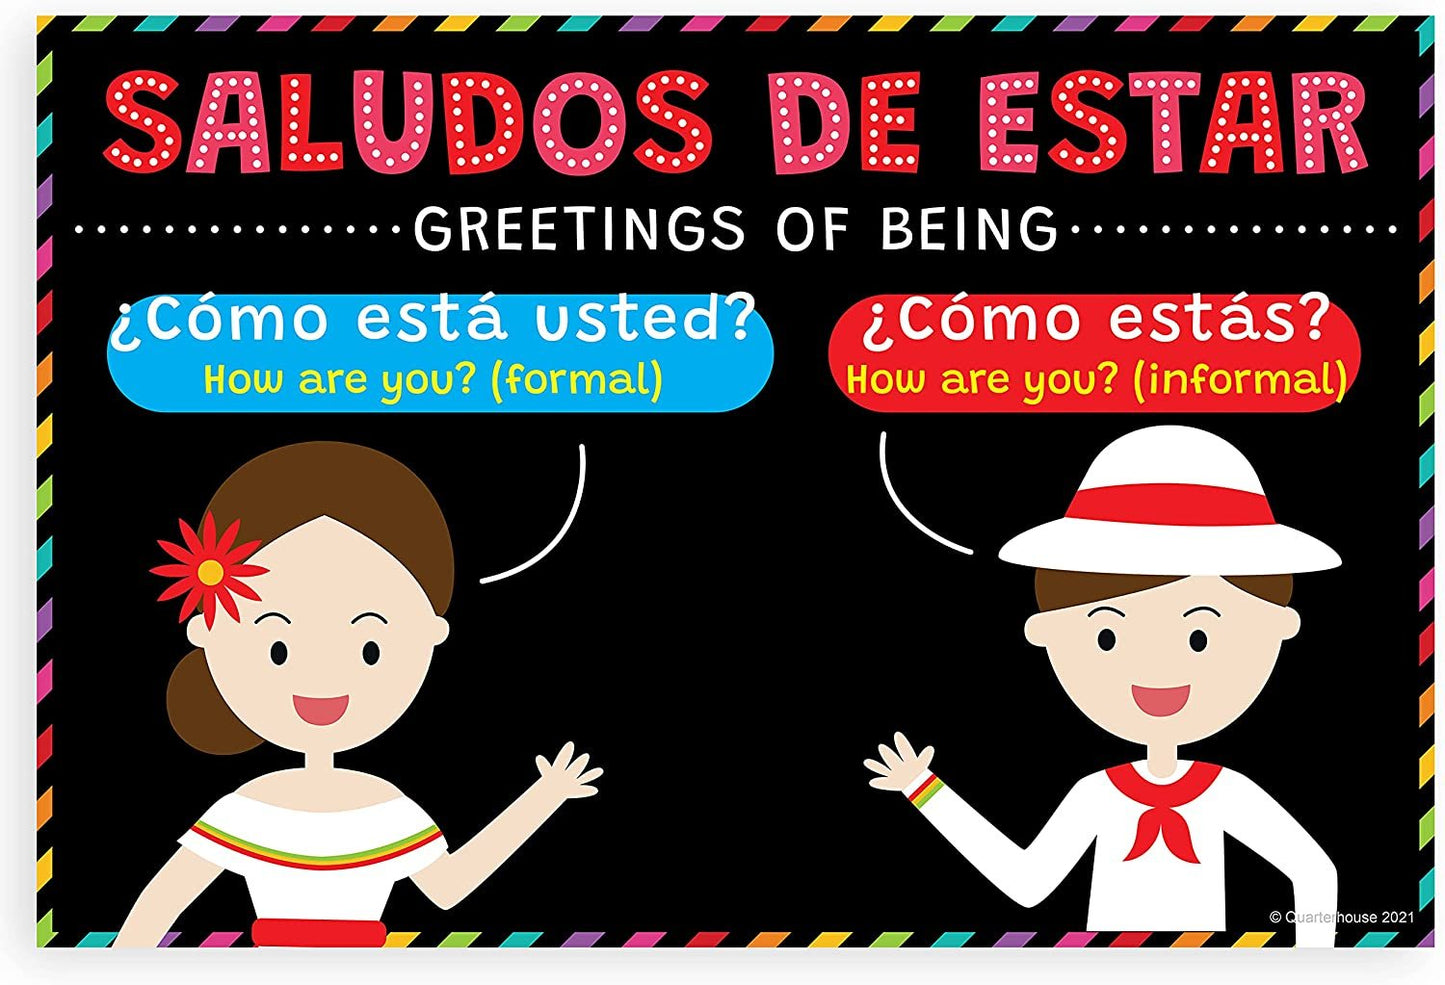 Quarterhouse Spanish Greetings, Sayings, and Questions Poster Set, Spanish - ESL Classroom Learning Materials for K-12 Students and Teachers, Set of 5, 12 x 18 Inches, Extra Durable